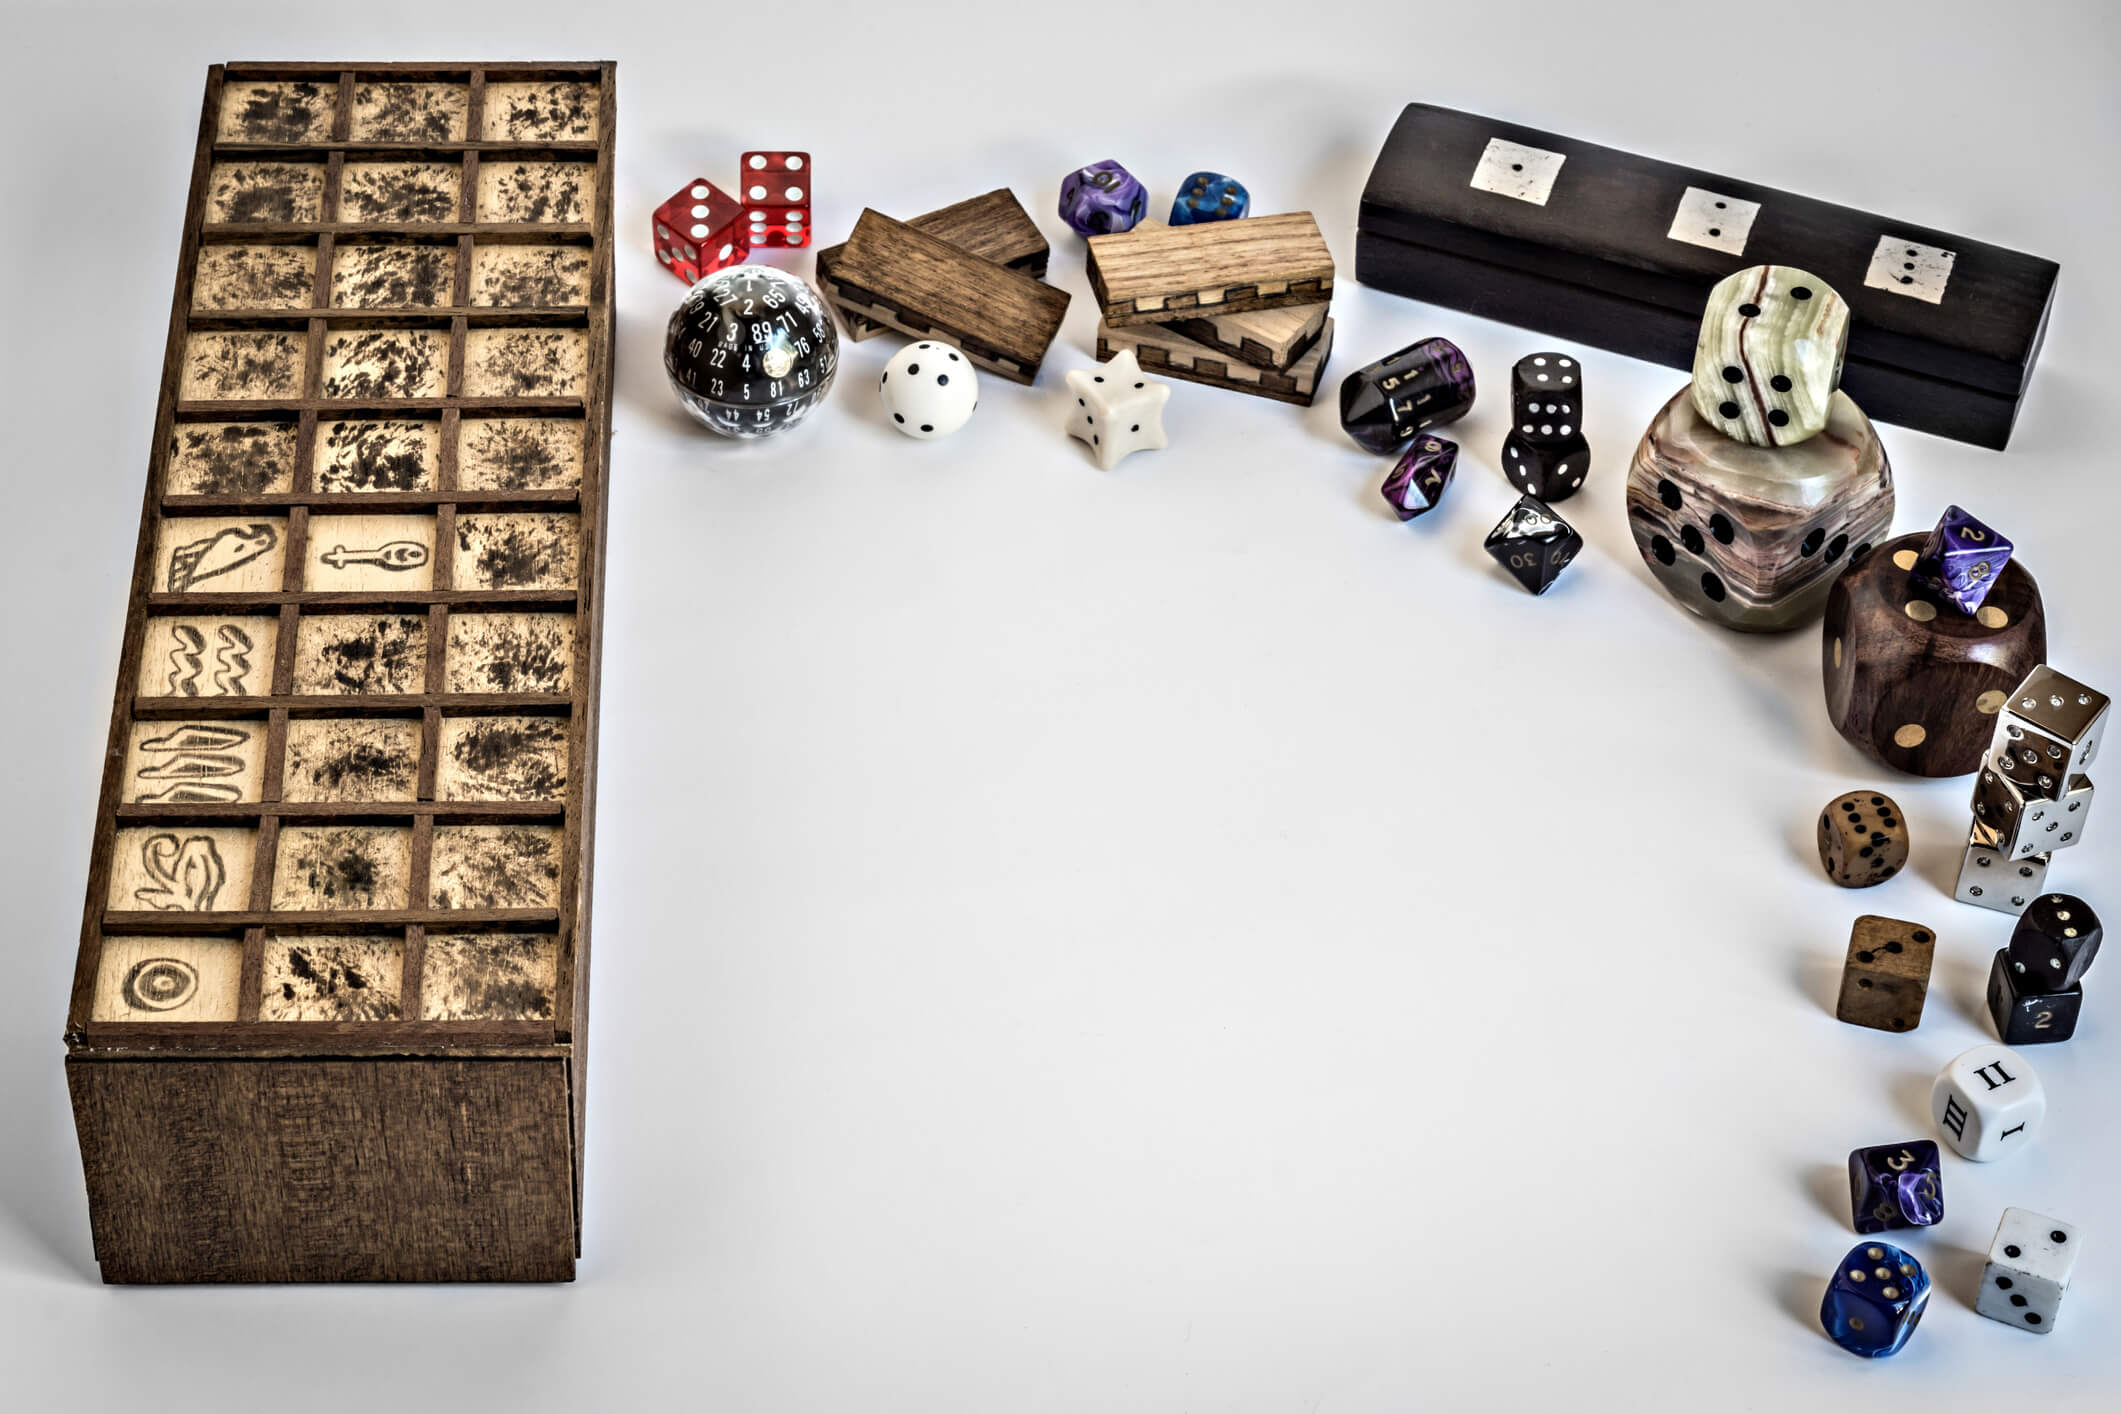 Wooden game board with assorted counters and dice around it